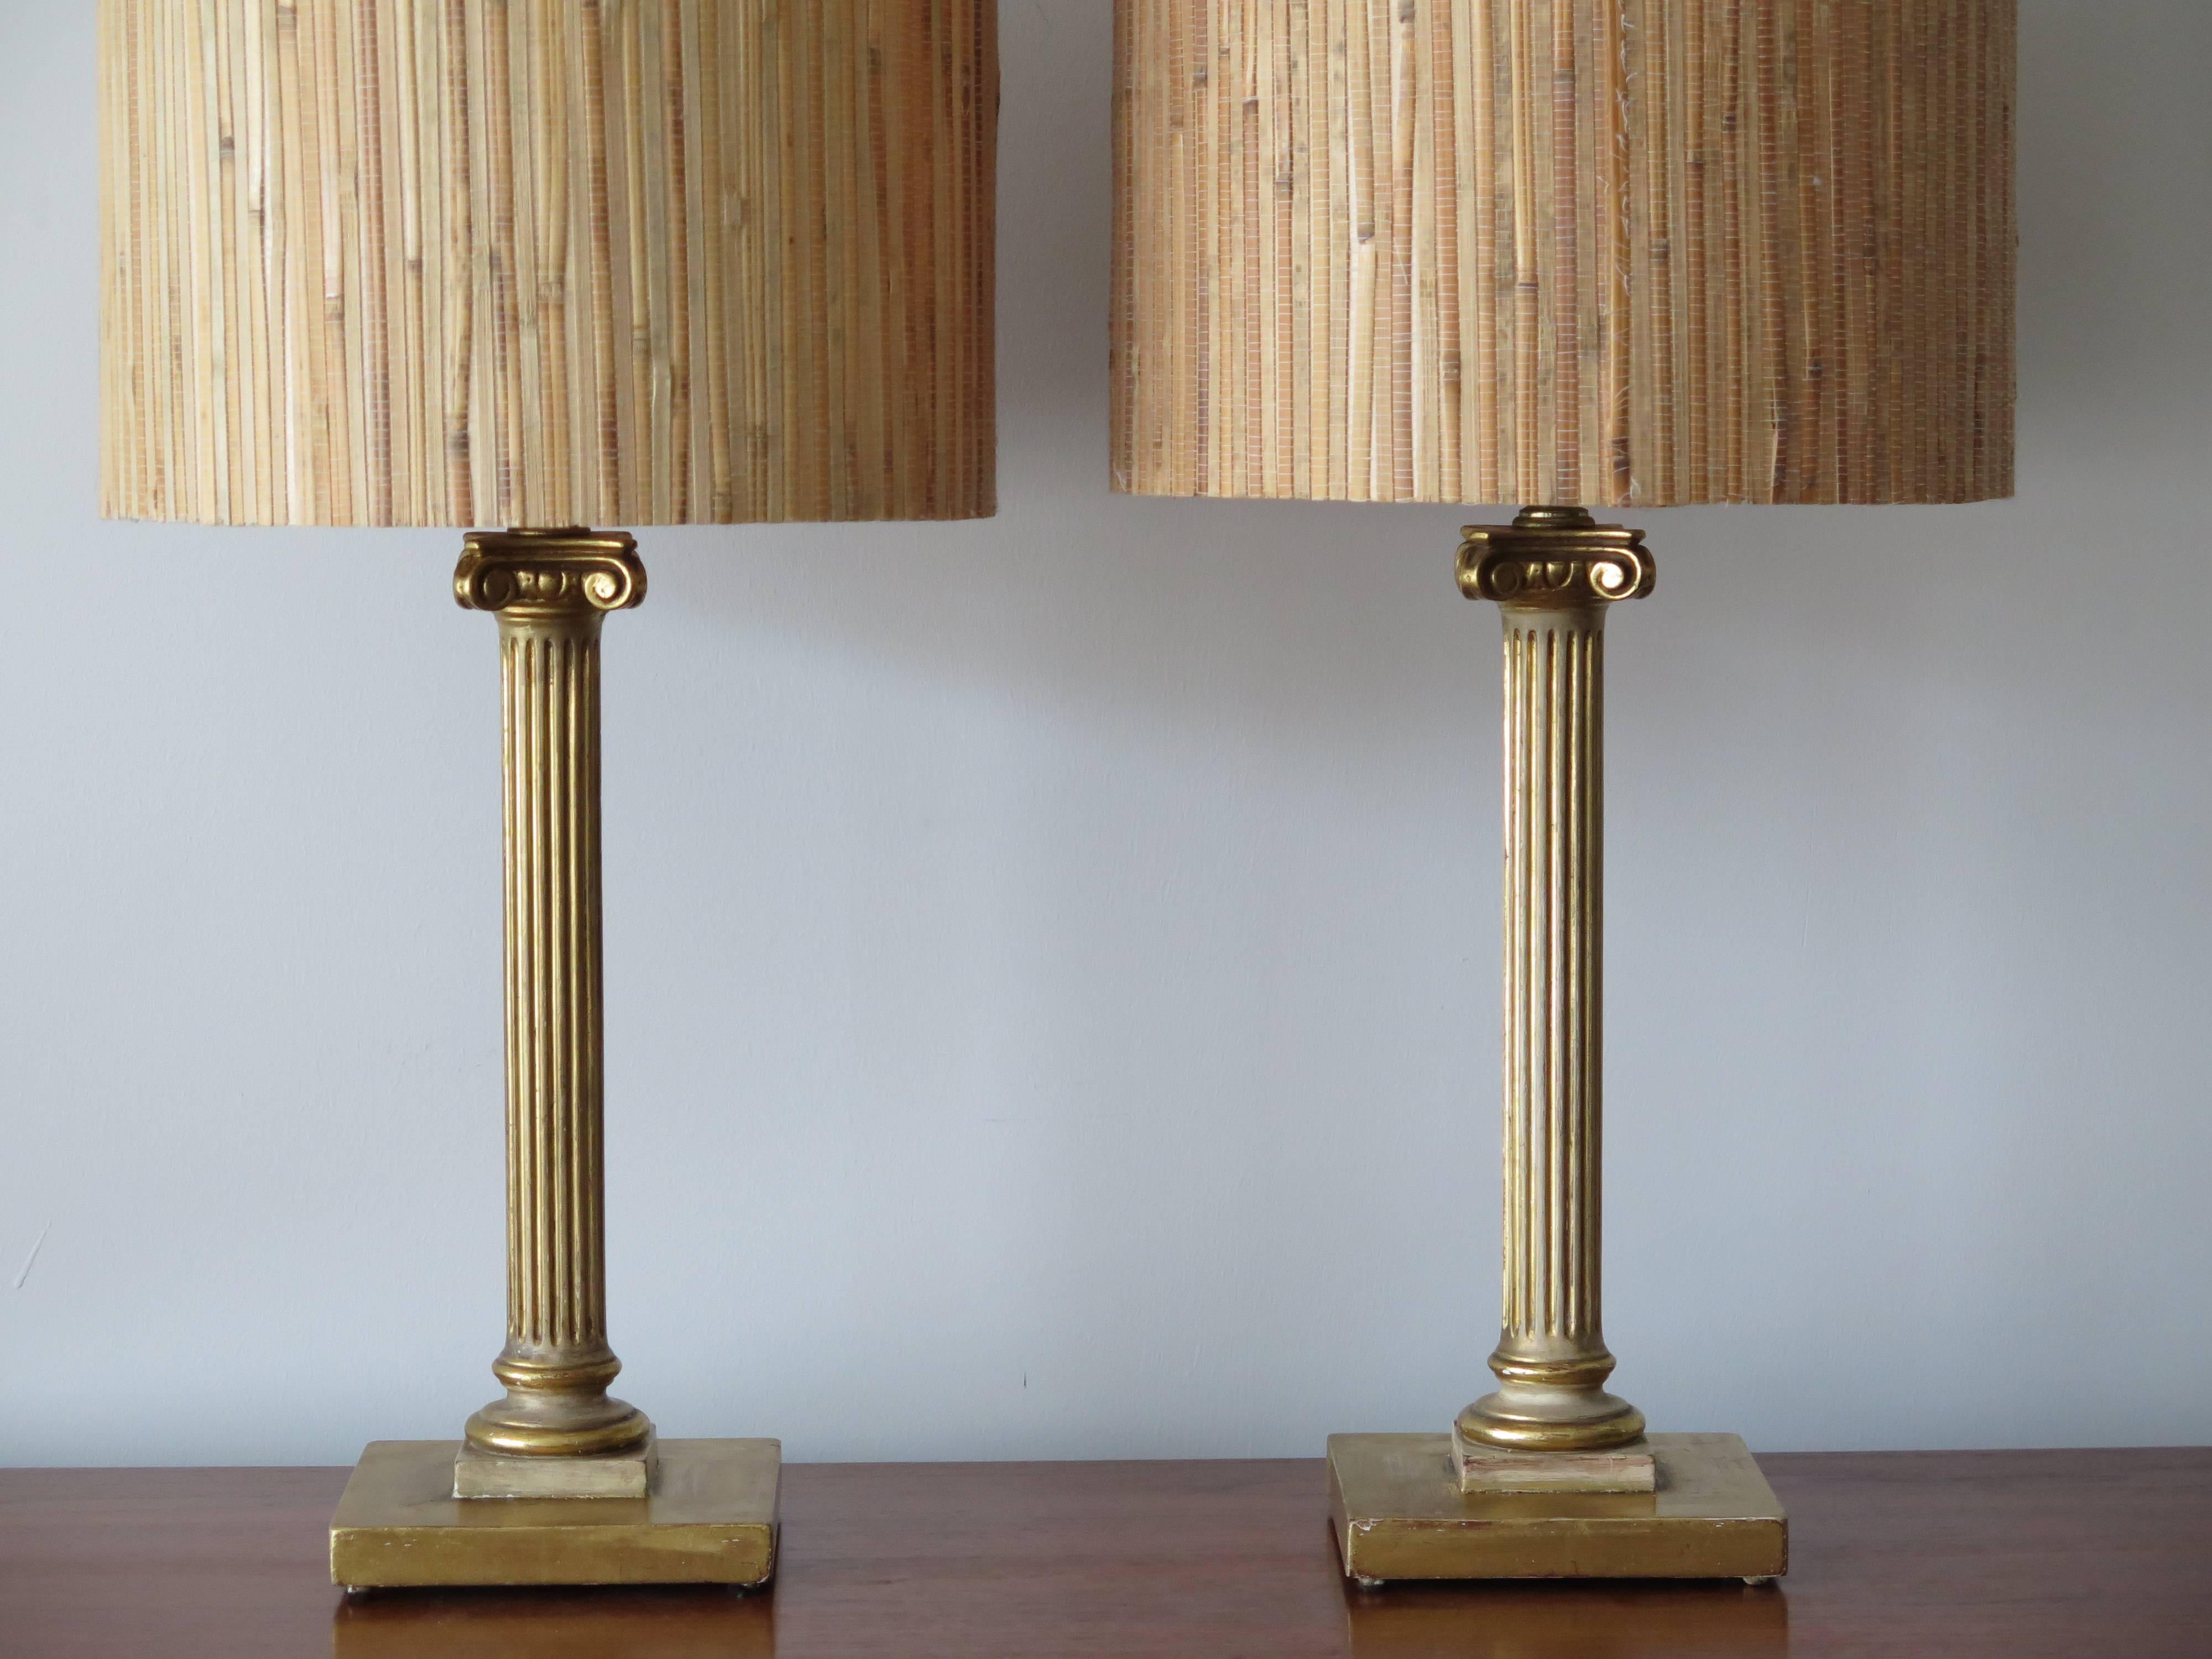 A pair of vintage 1940s Maison Jansen table lamps. Giltwood, original sockets, shades replaced.